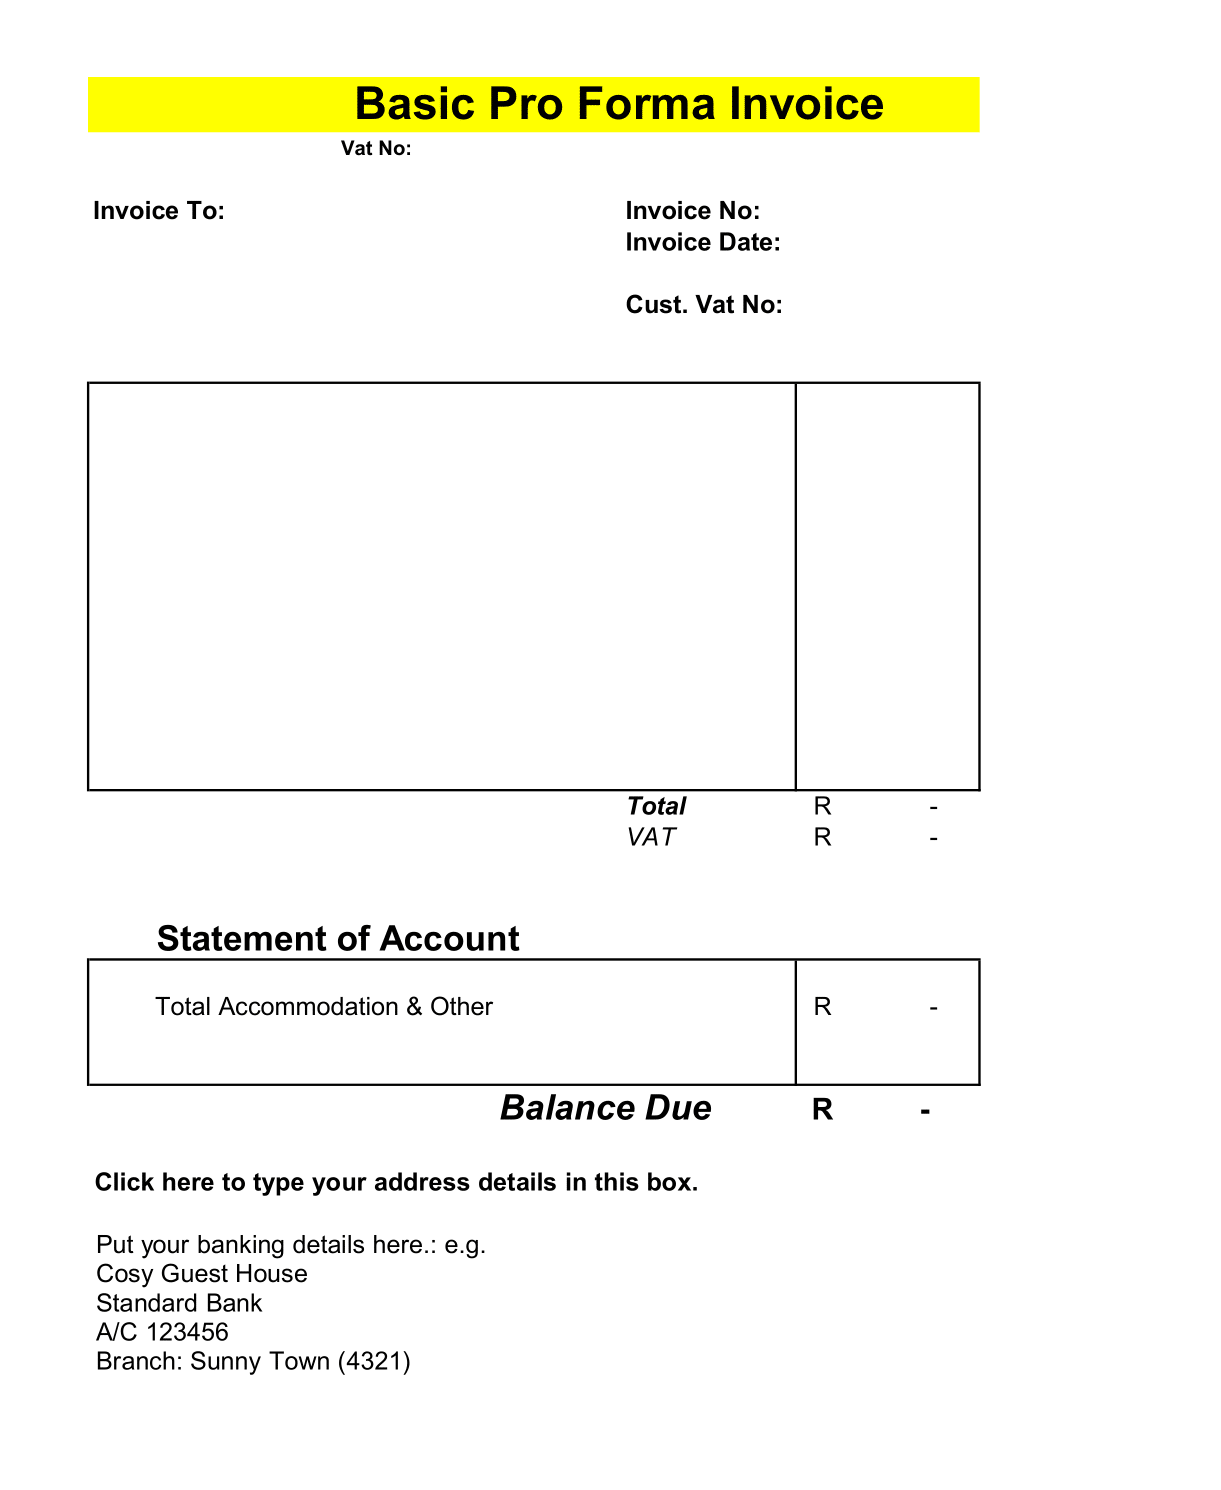 Basic Pro Forma Invoice Format Template in excel